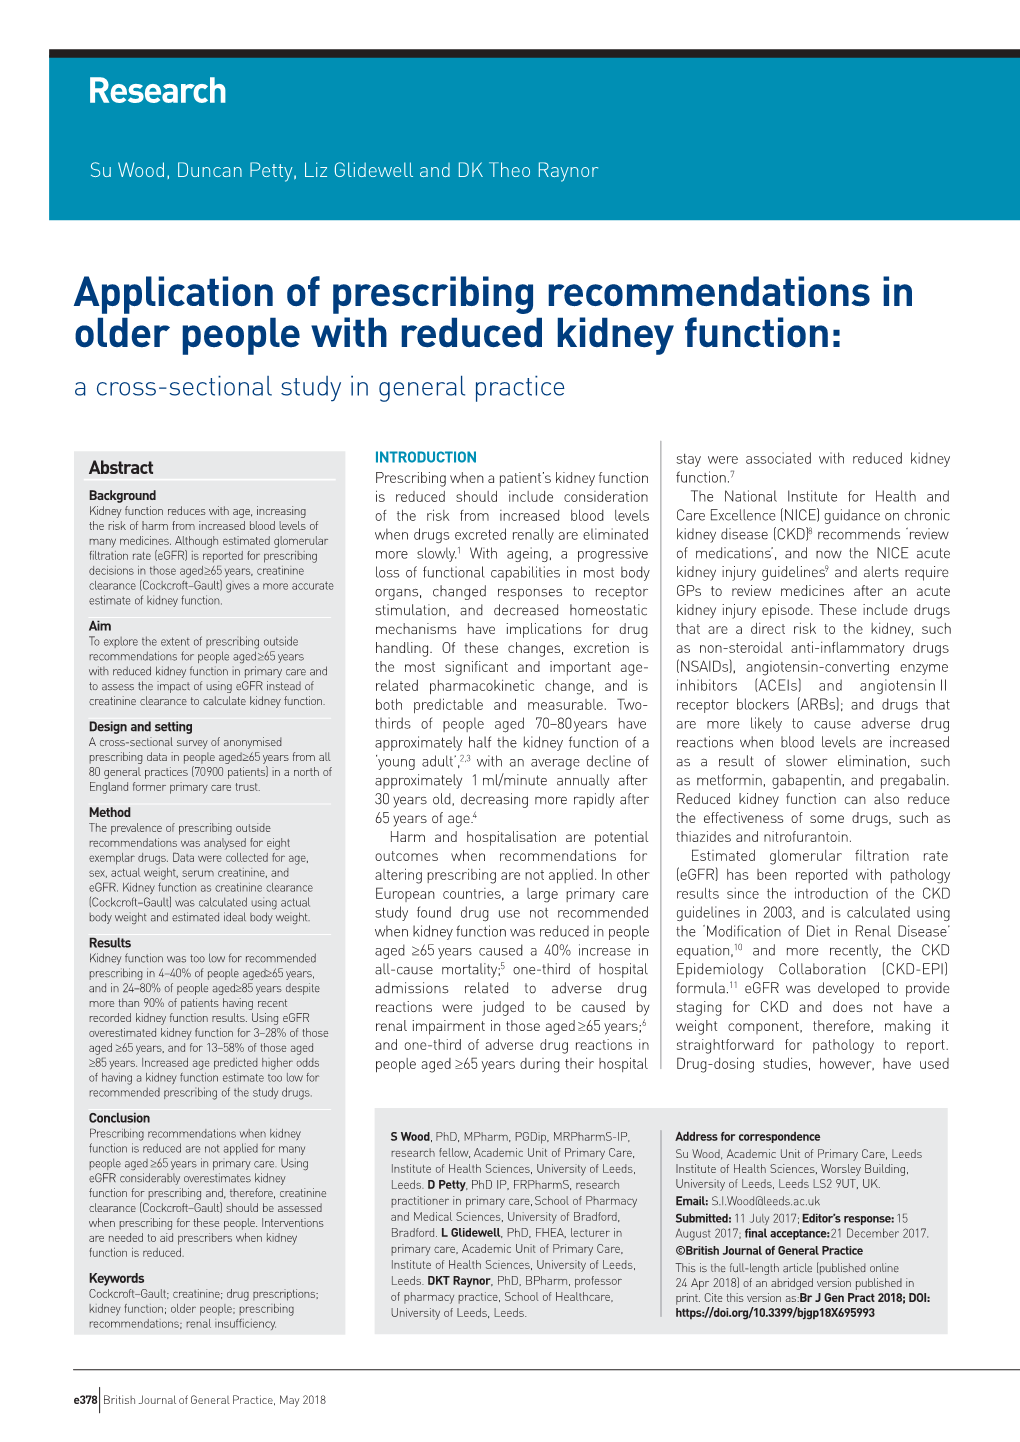 Application of Prescribing Recommendations in Older People with Reduced Kidney Function: a Cross-Sectional Study in General Practice